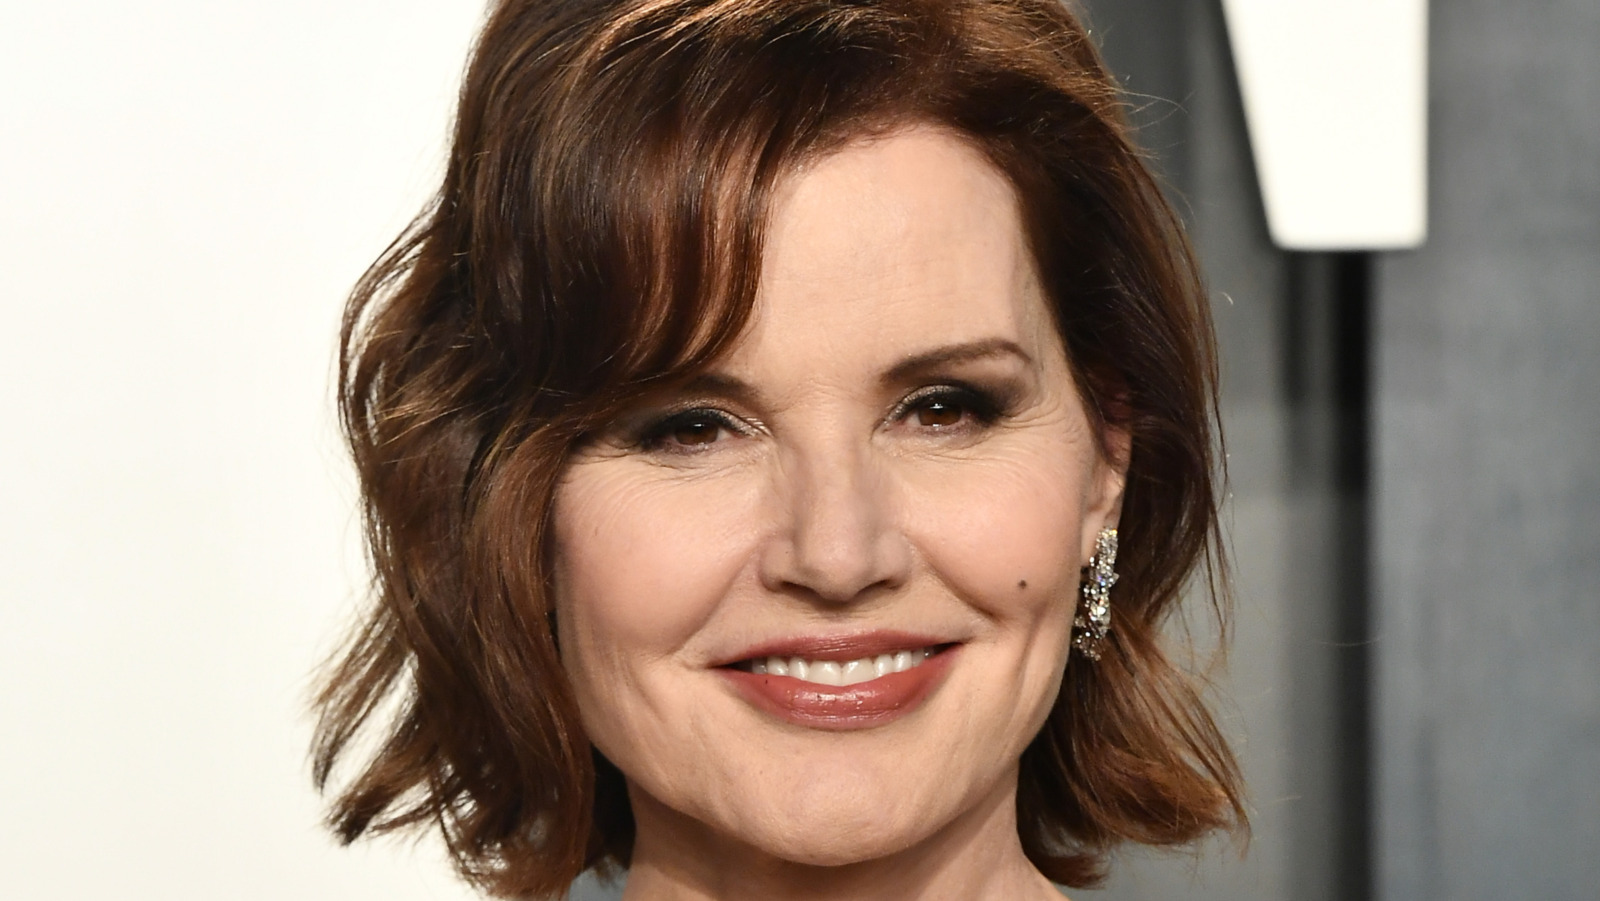 Why You Haven't Heard From Geena Davis In A While